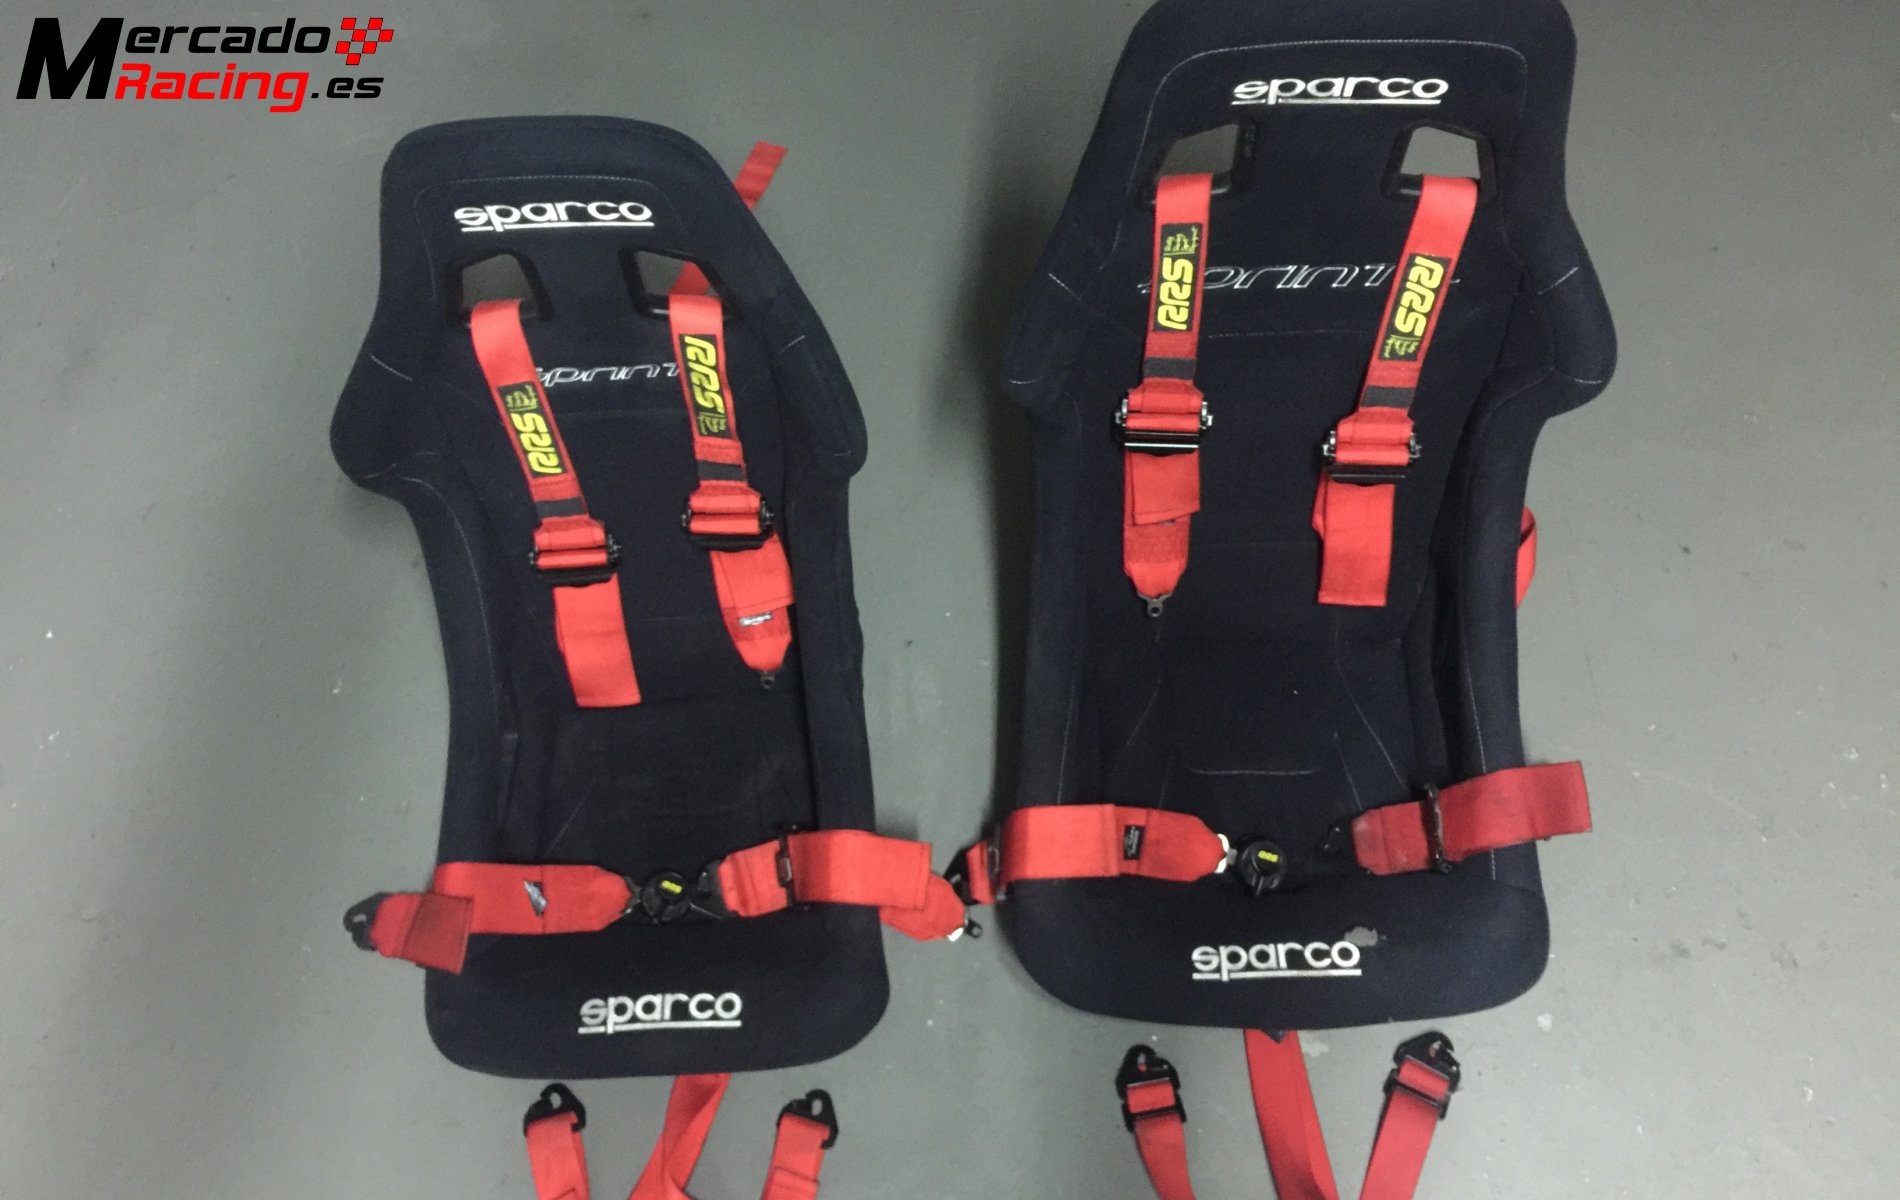 Backets sparco sprint mas arneses rrs